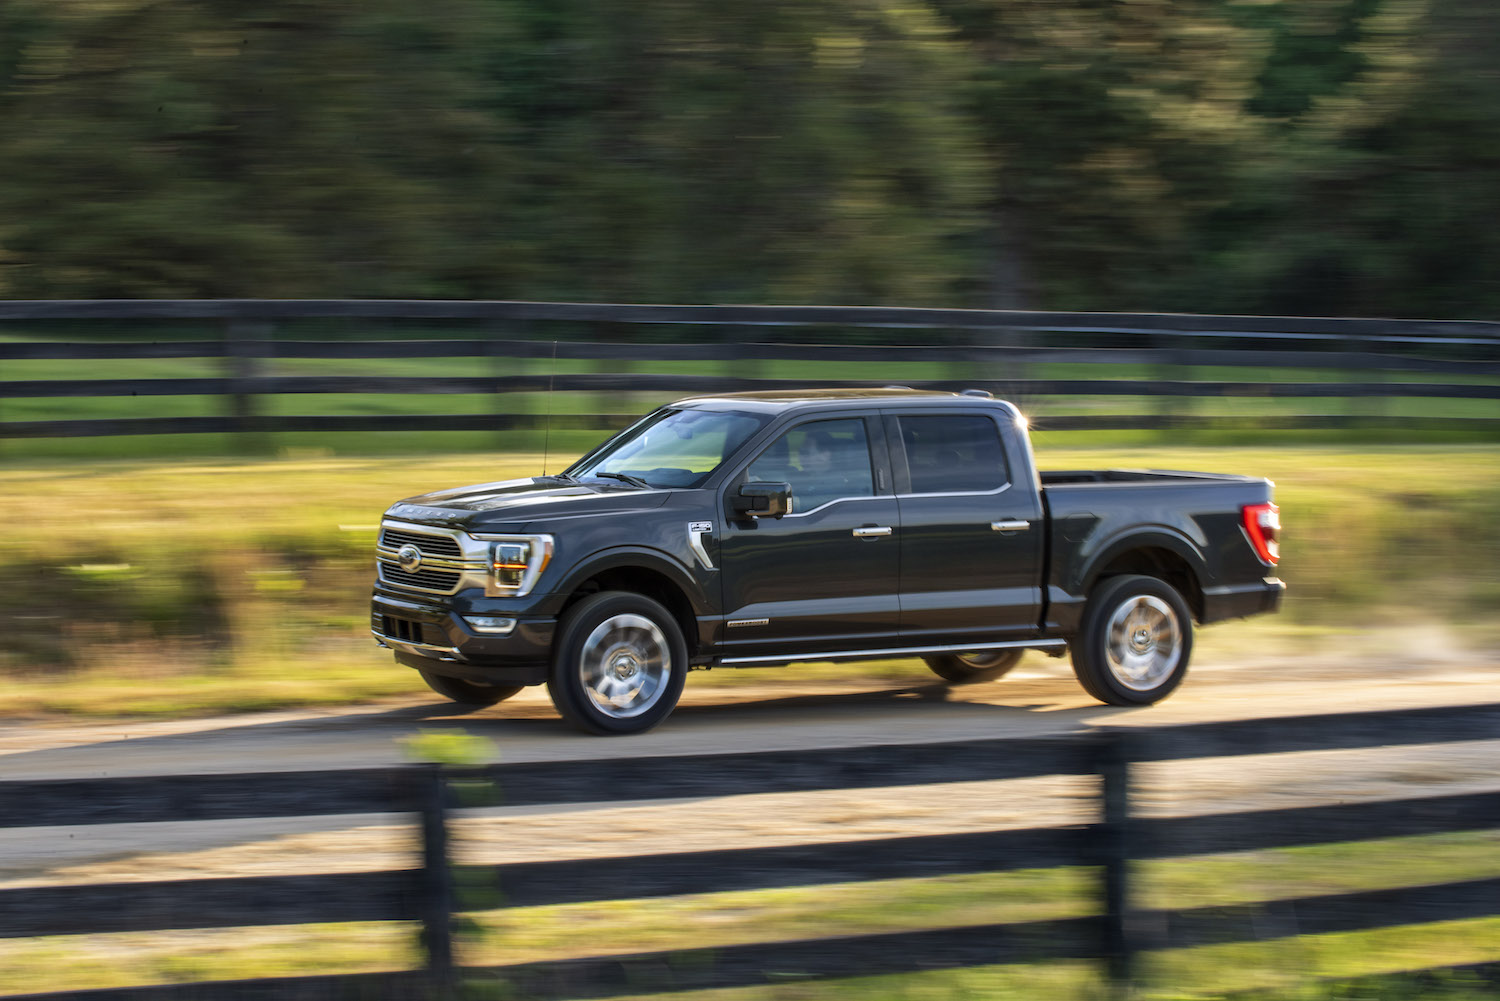 Promotional photo of a dark gray Ford F-150 Powerboost Hybrid Pickup truck driving on a country road, with a fence visible in the background.